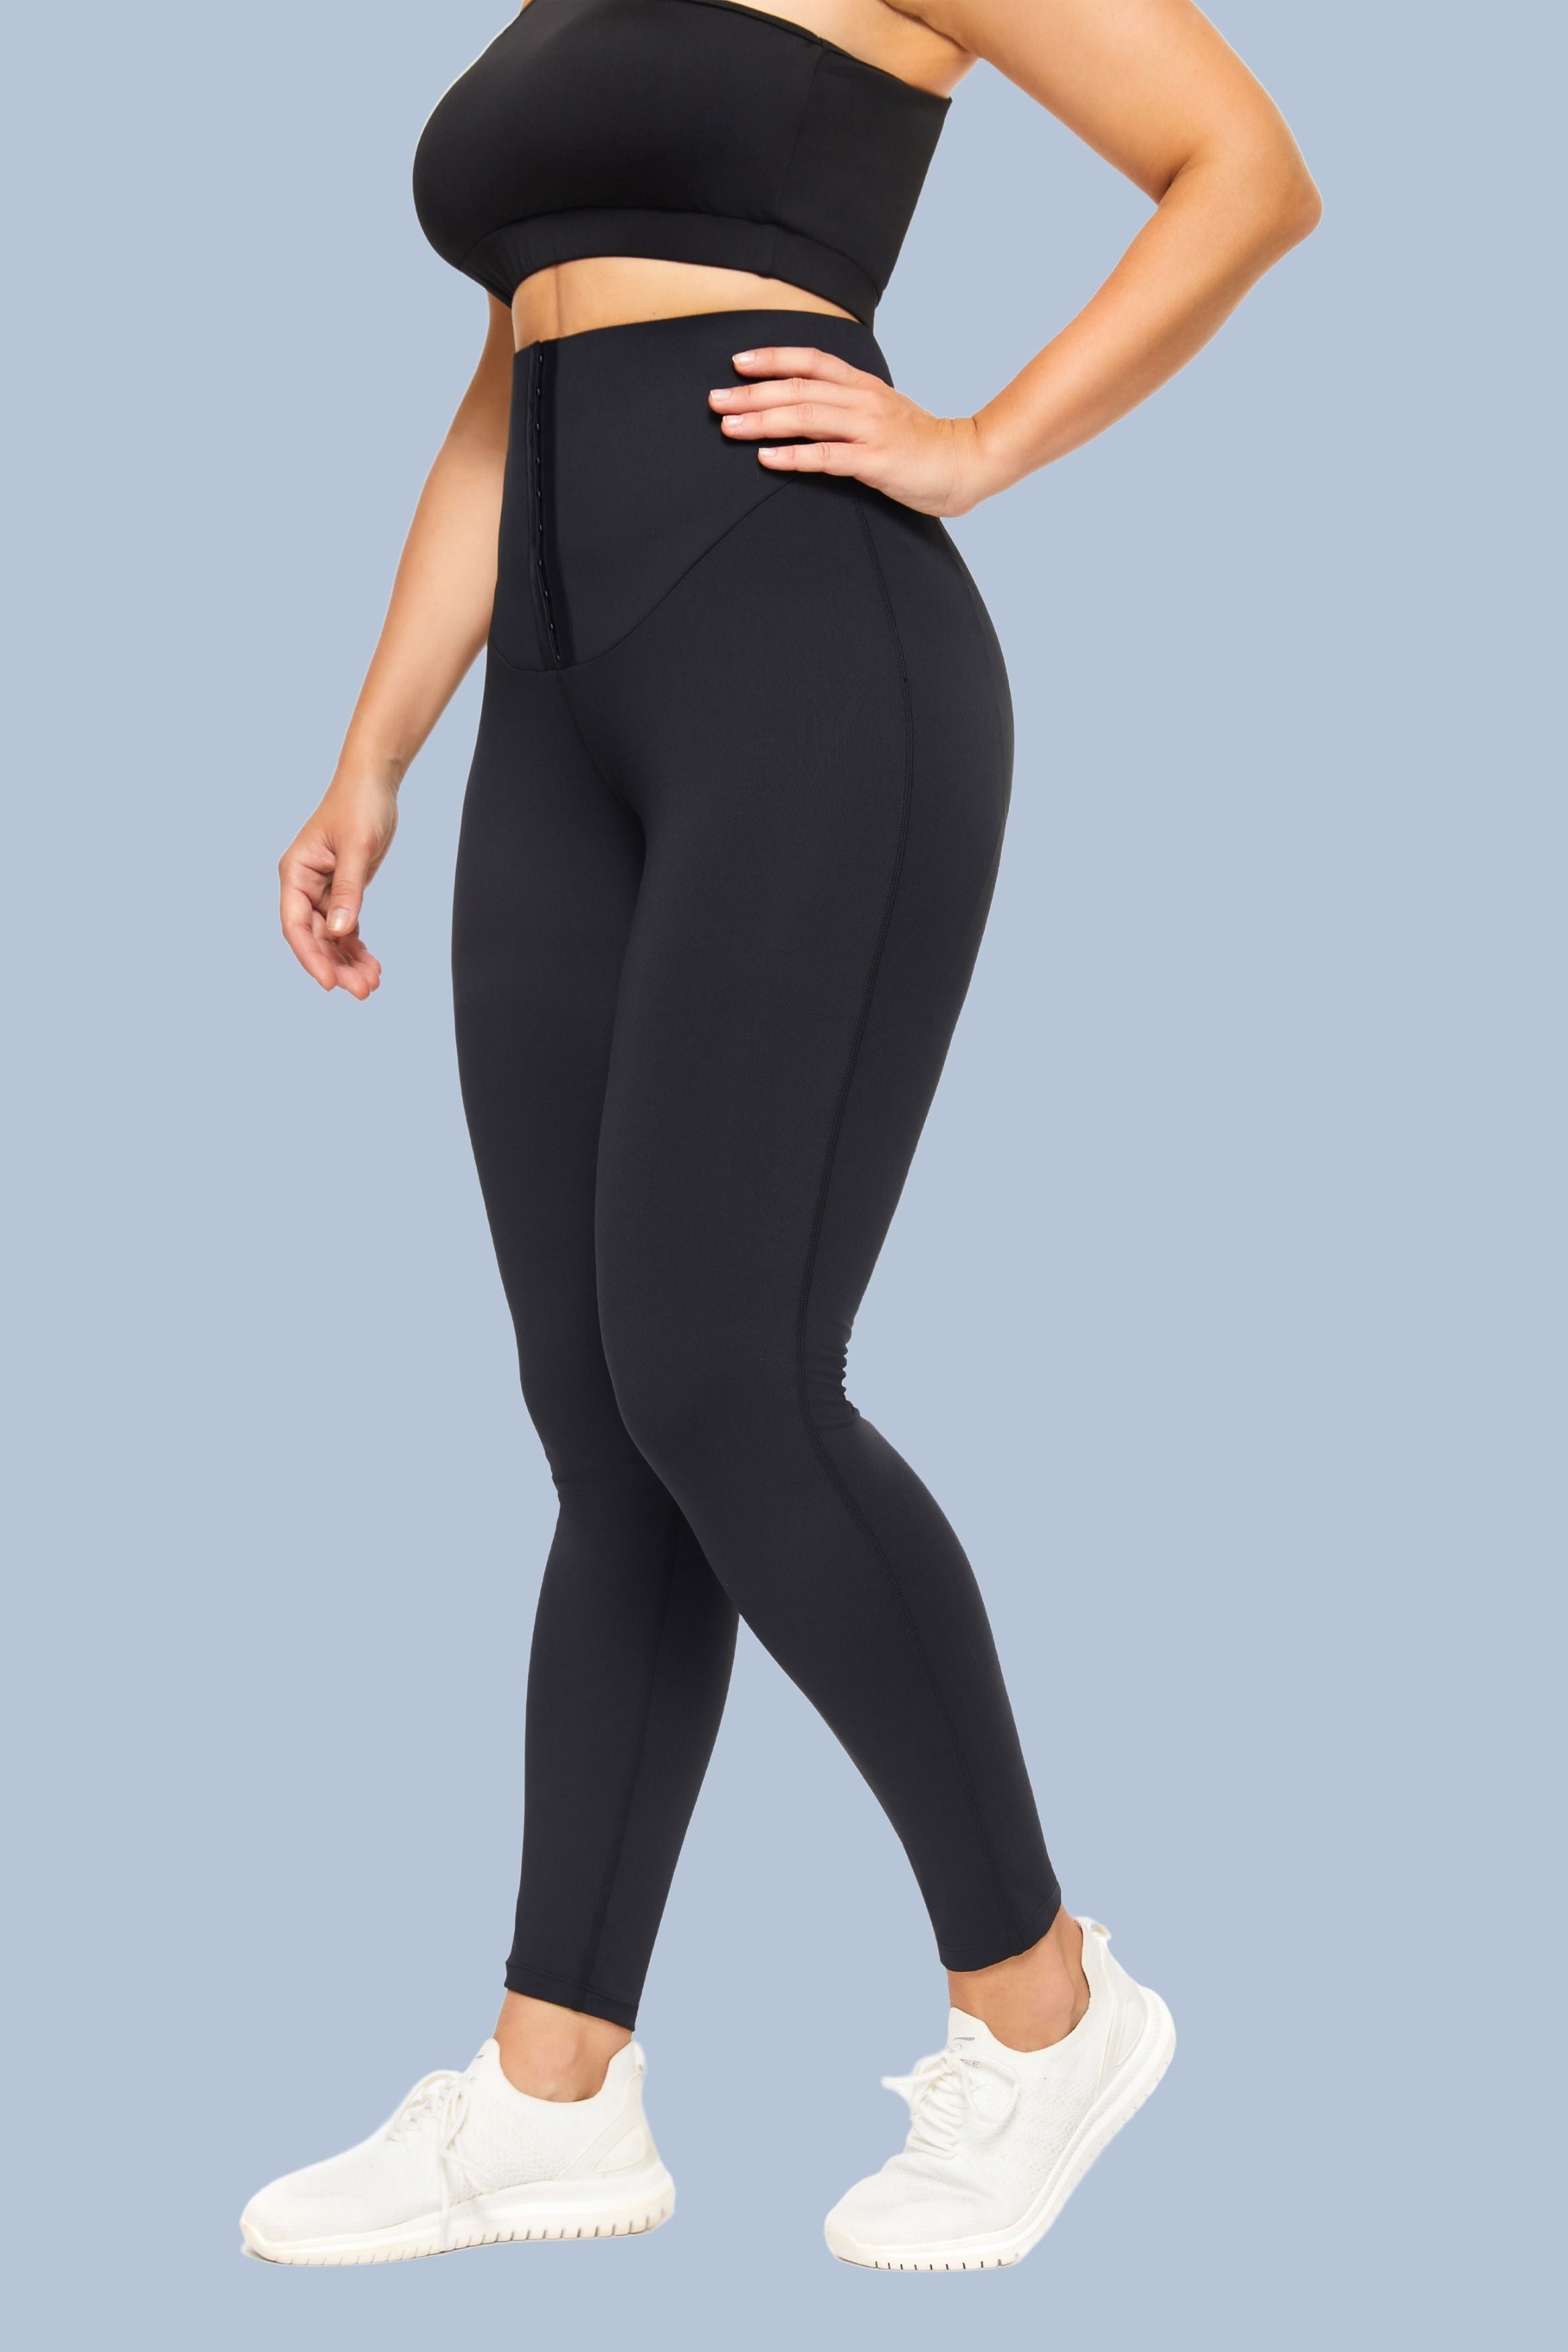 Shapermint High Waisted Black Leggings - Size Small